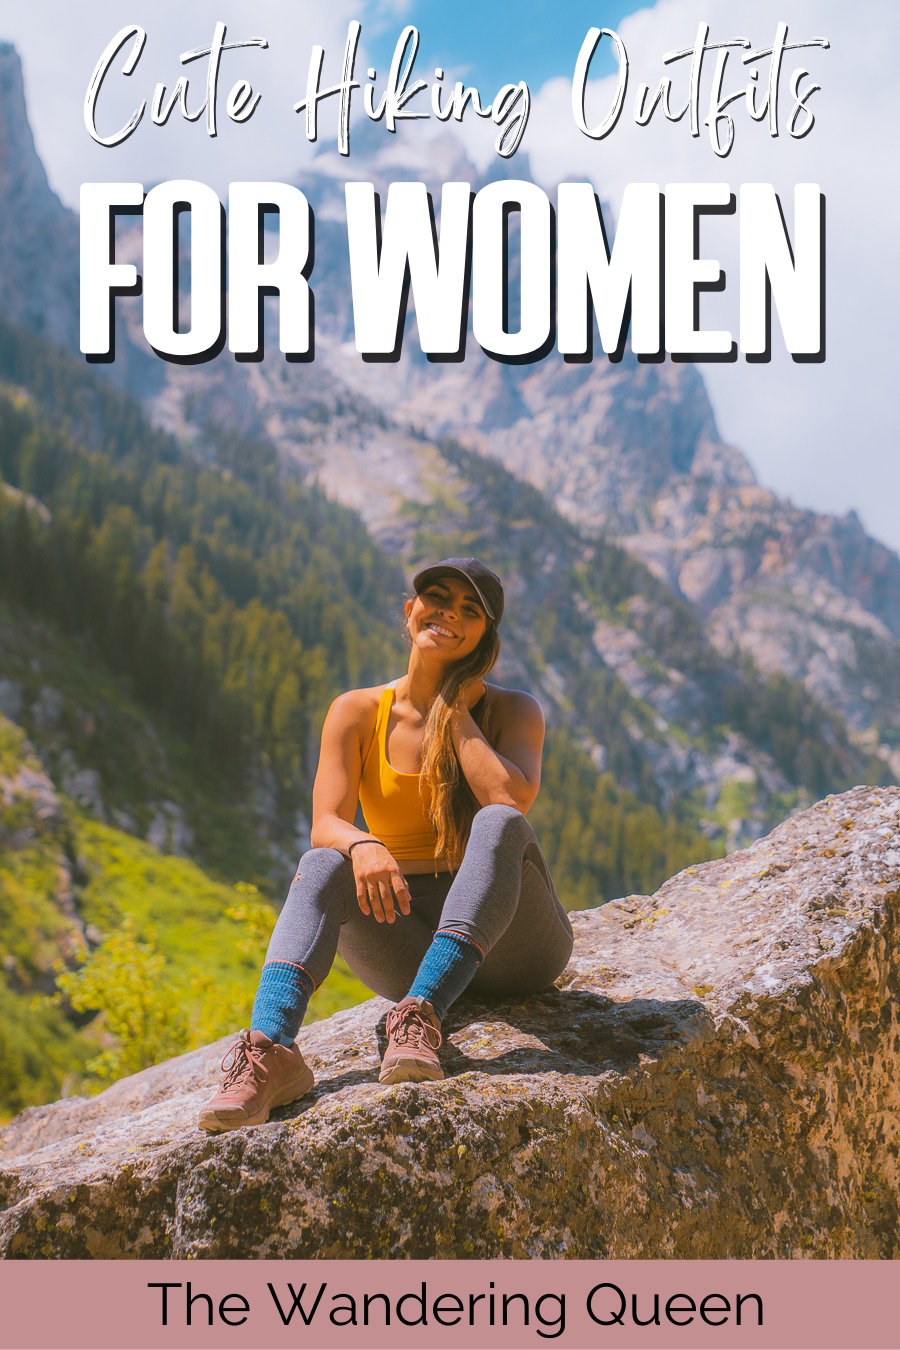 10 Perfect Hiking Hats for Women - Cute, Comfortable - Summer to